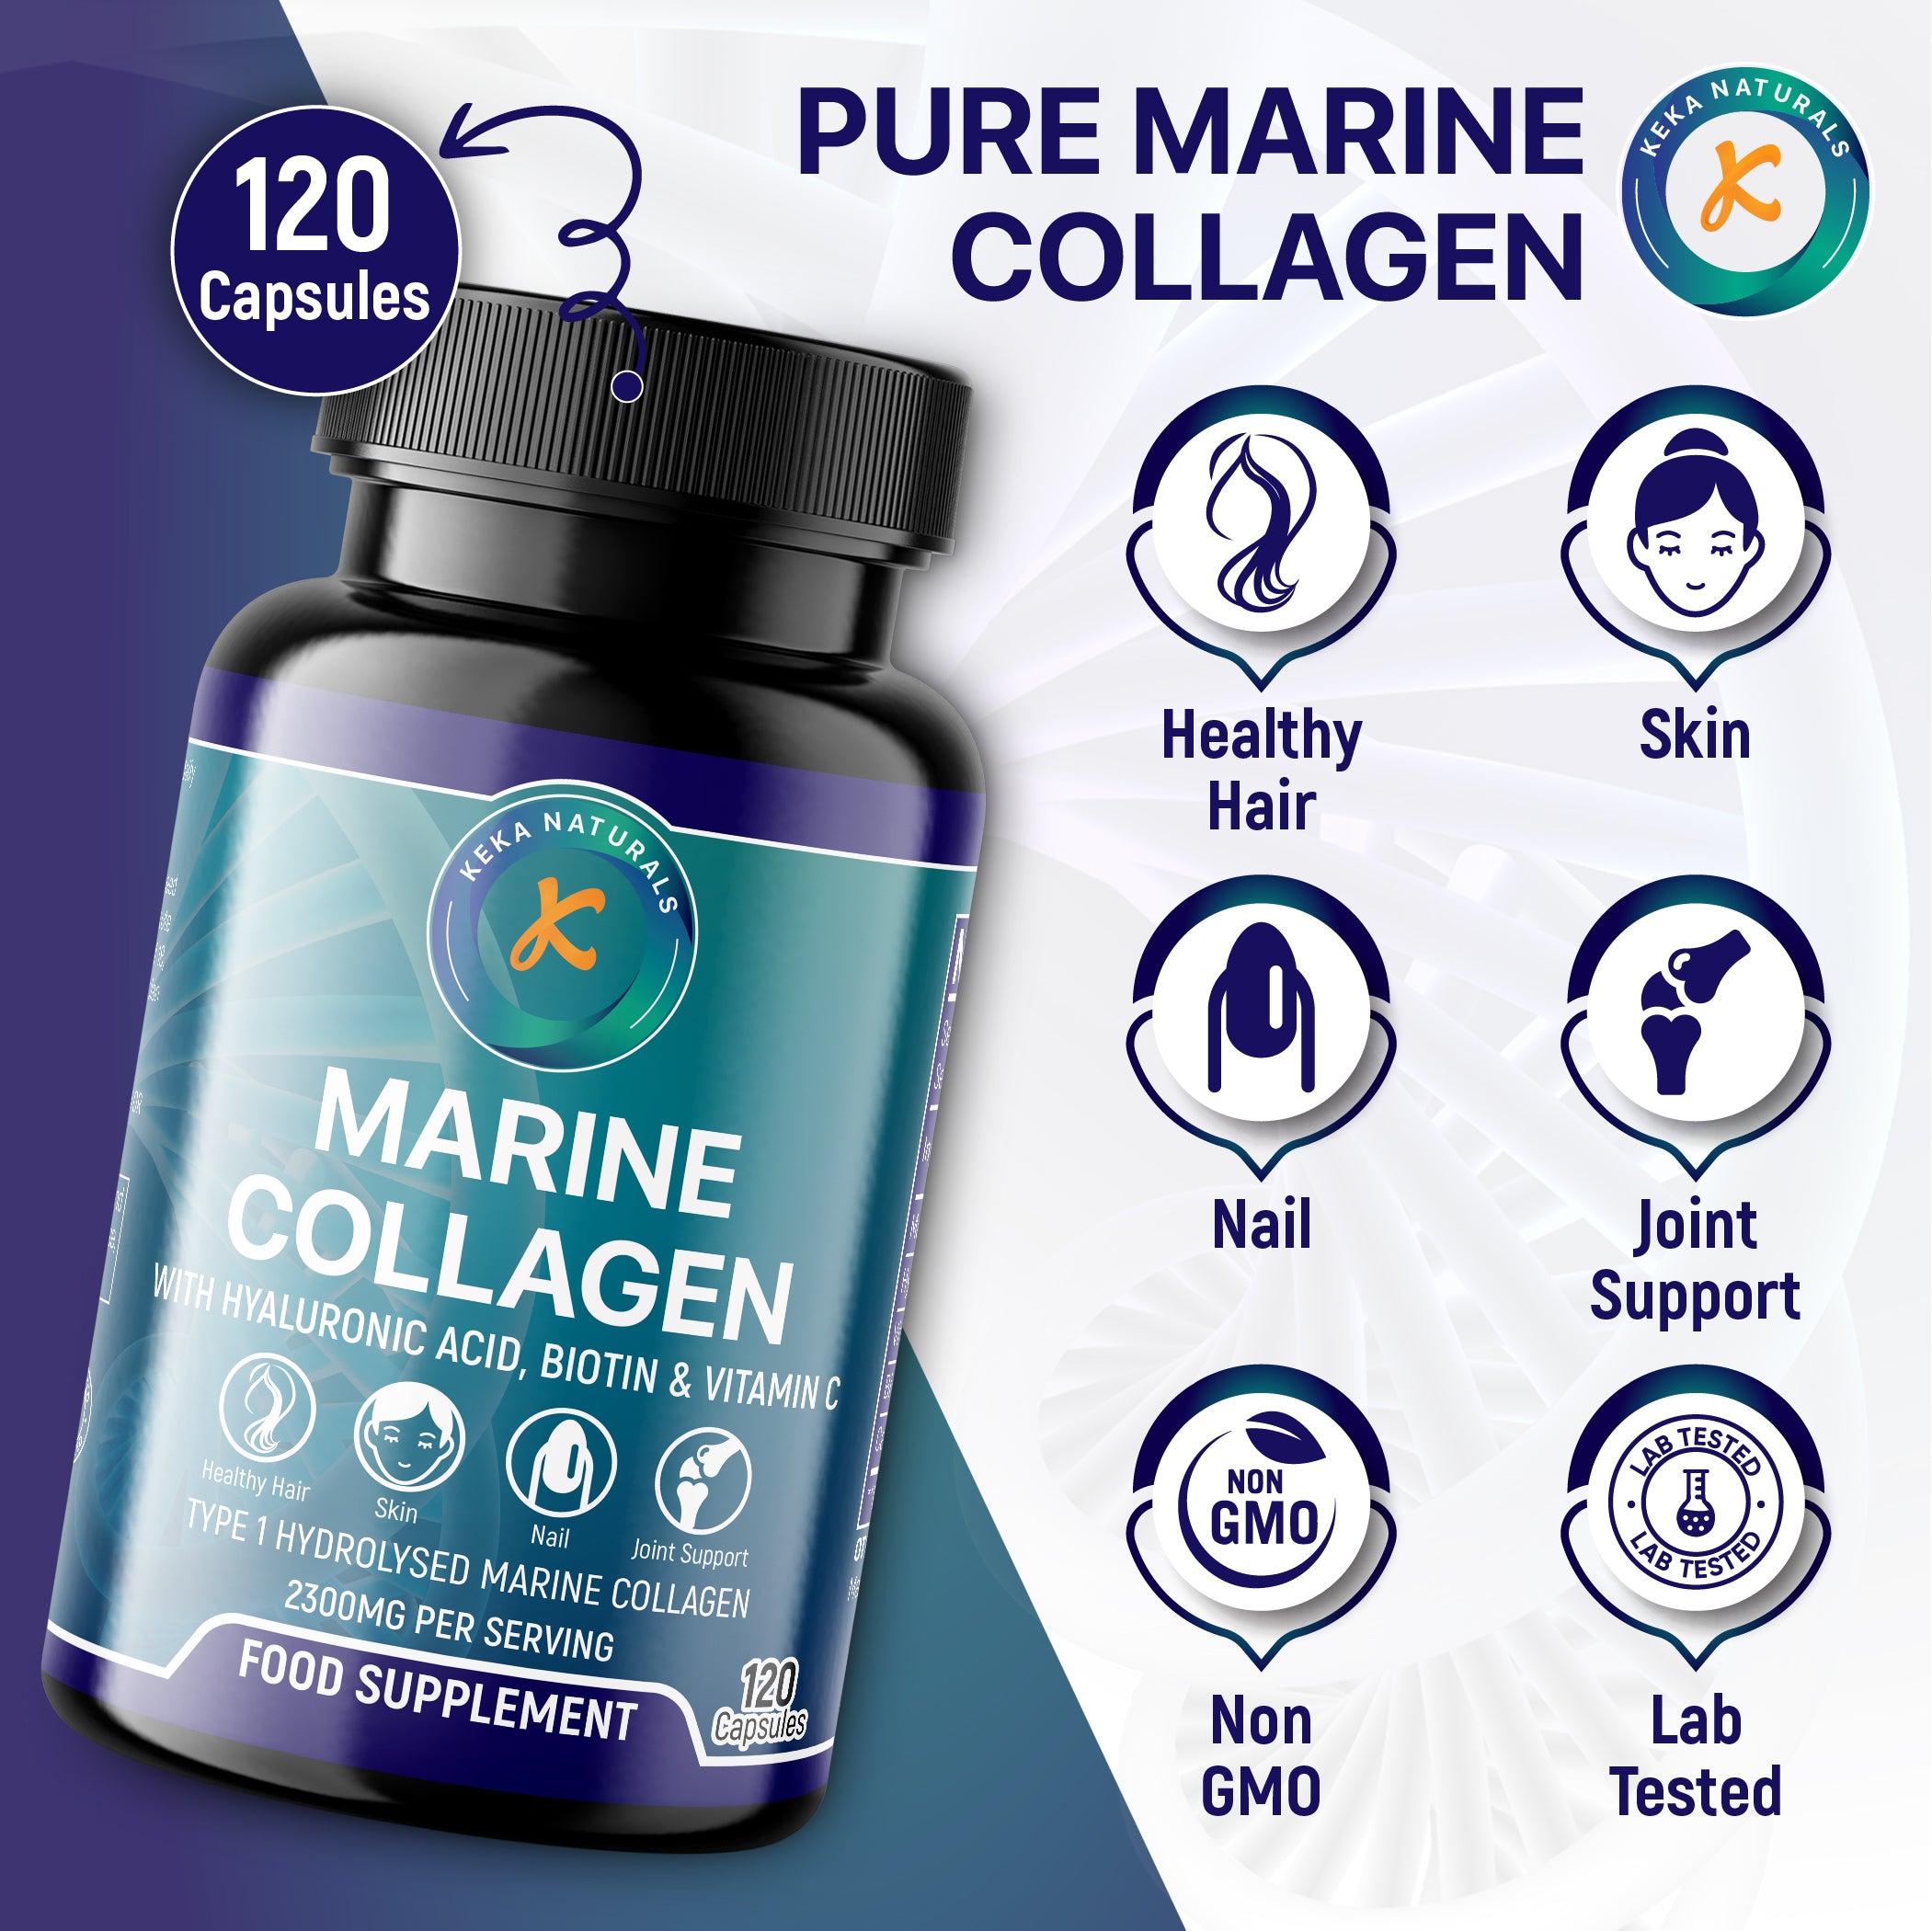 Marine Collagen with hyaluronic acid biotin and vitamin C 2300mg benefits for the body